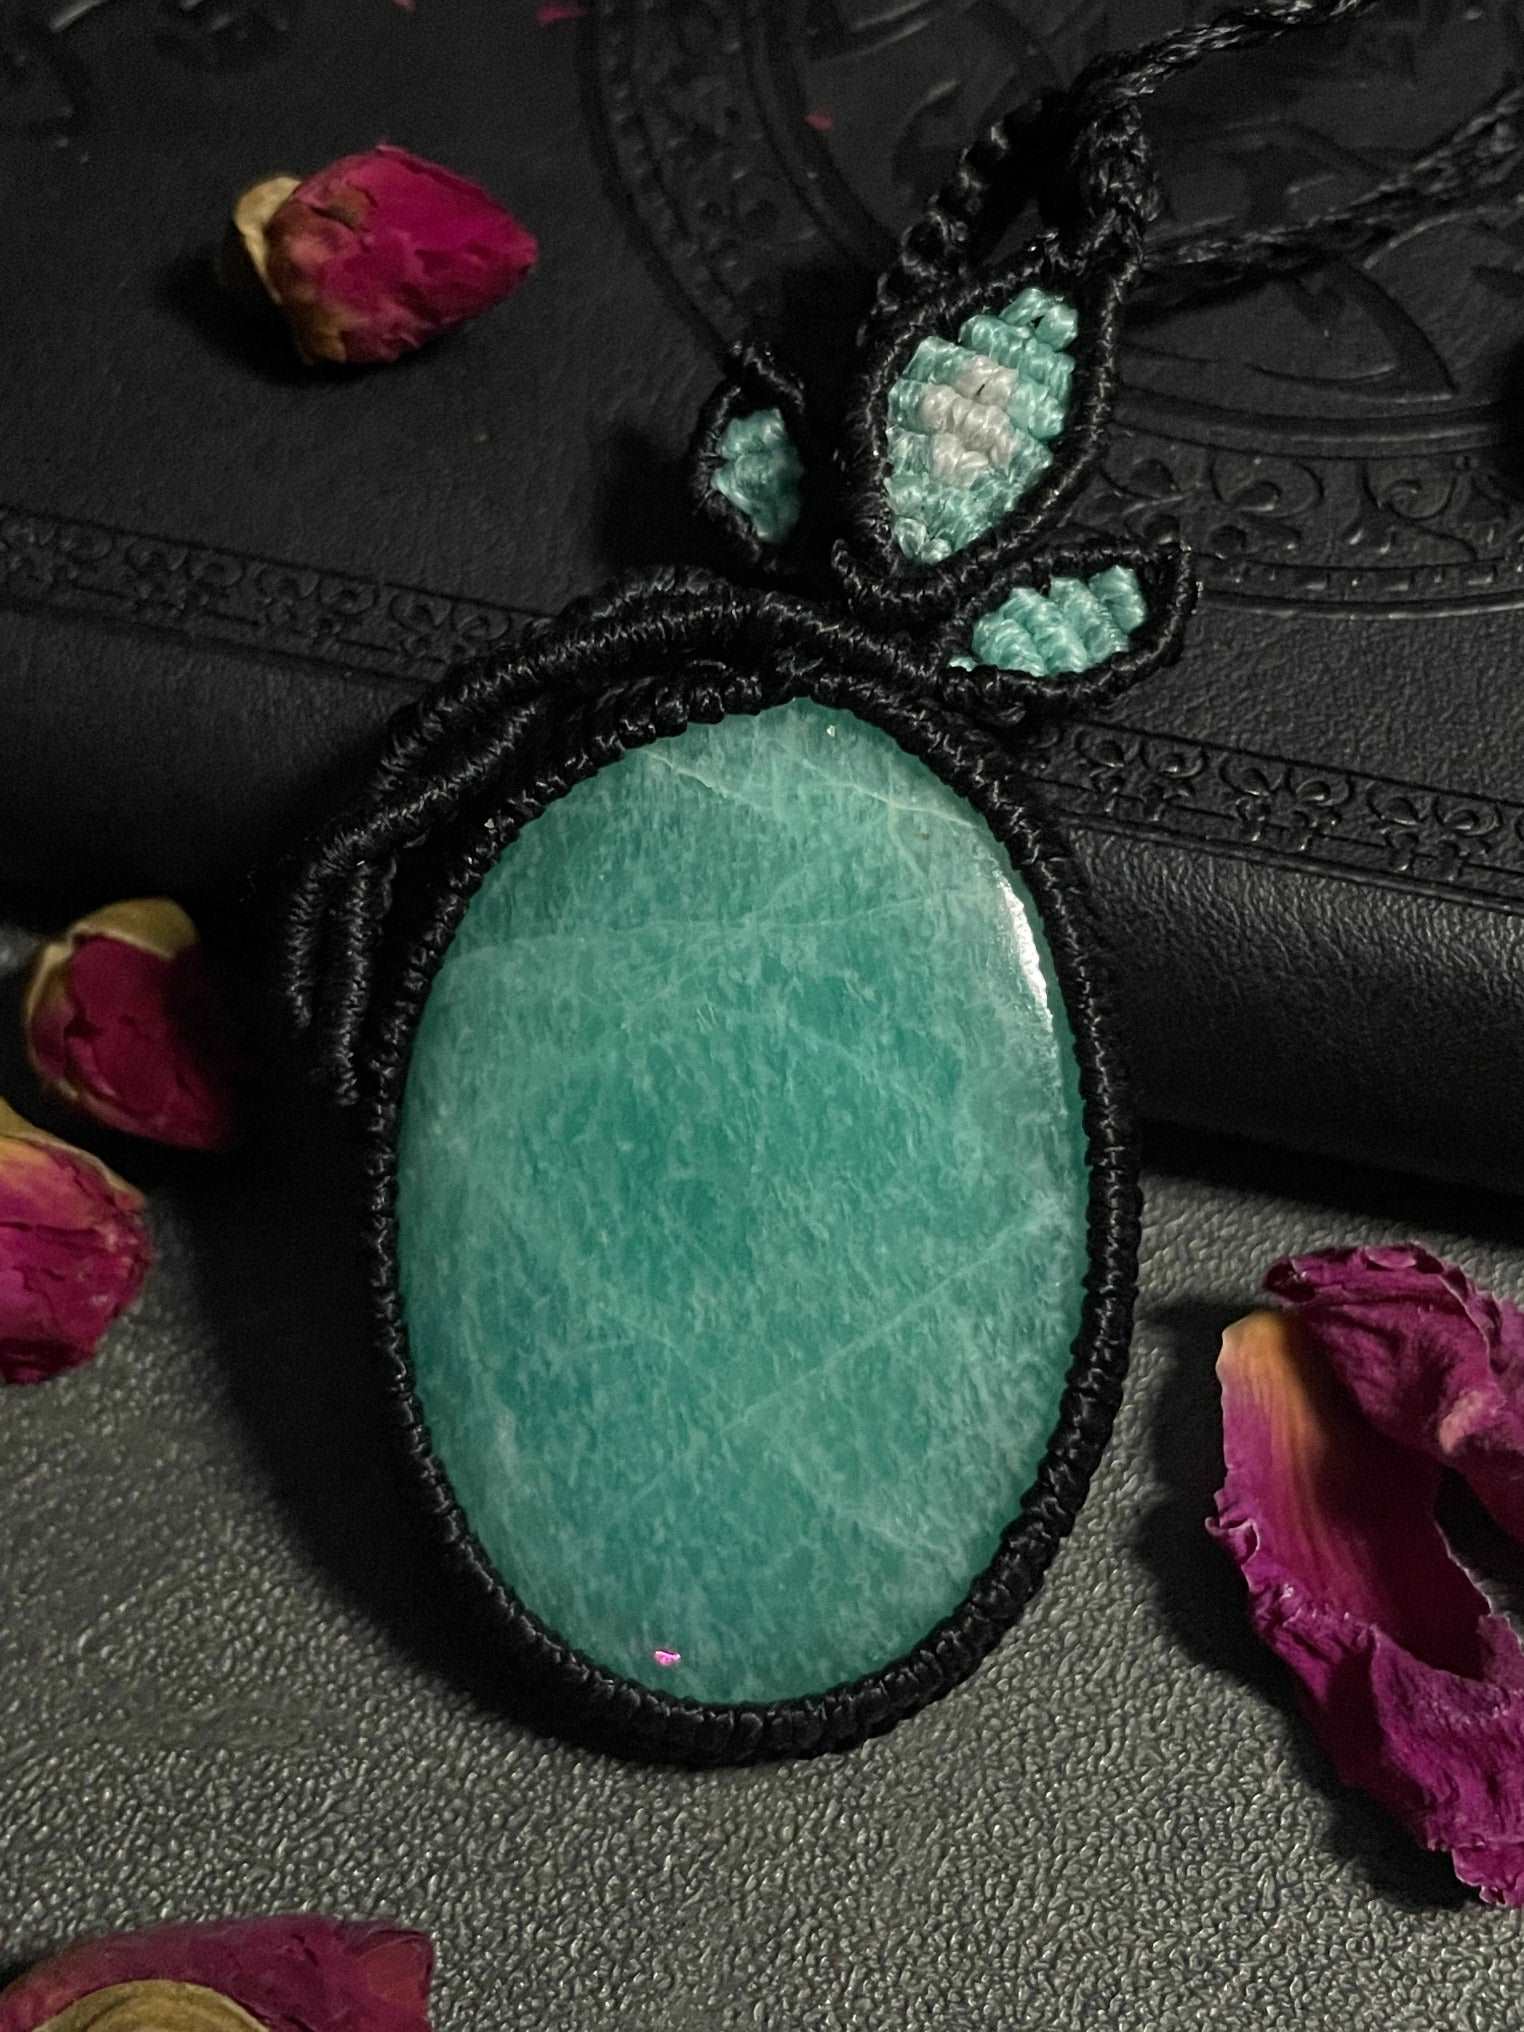 Pictured is an amazonite cabochon wrapped in macrame thread. A gothic book and flowers are nearby. Amazonite Macramé Necklace (Twisted Nightshade Jewellery) - The Wandering Fox Emporium, Your Crystal Store front